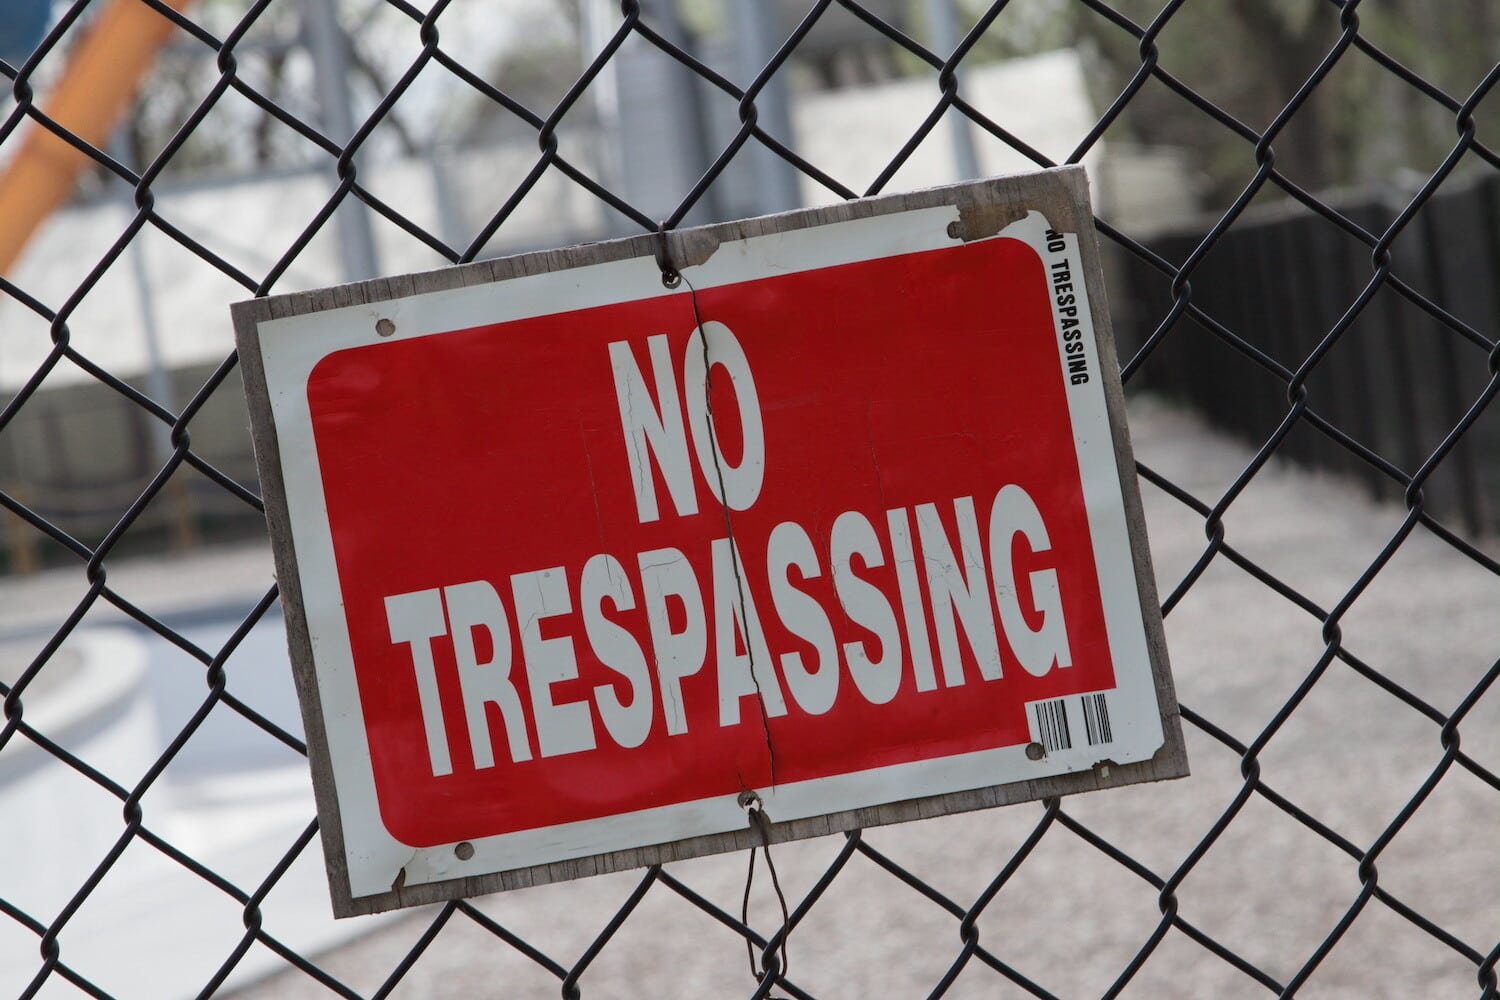 Red "No Trespassing" sign on a chainlink fence